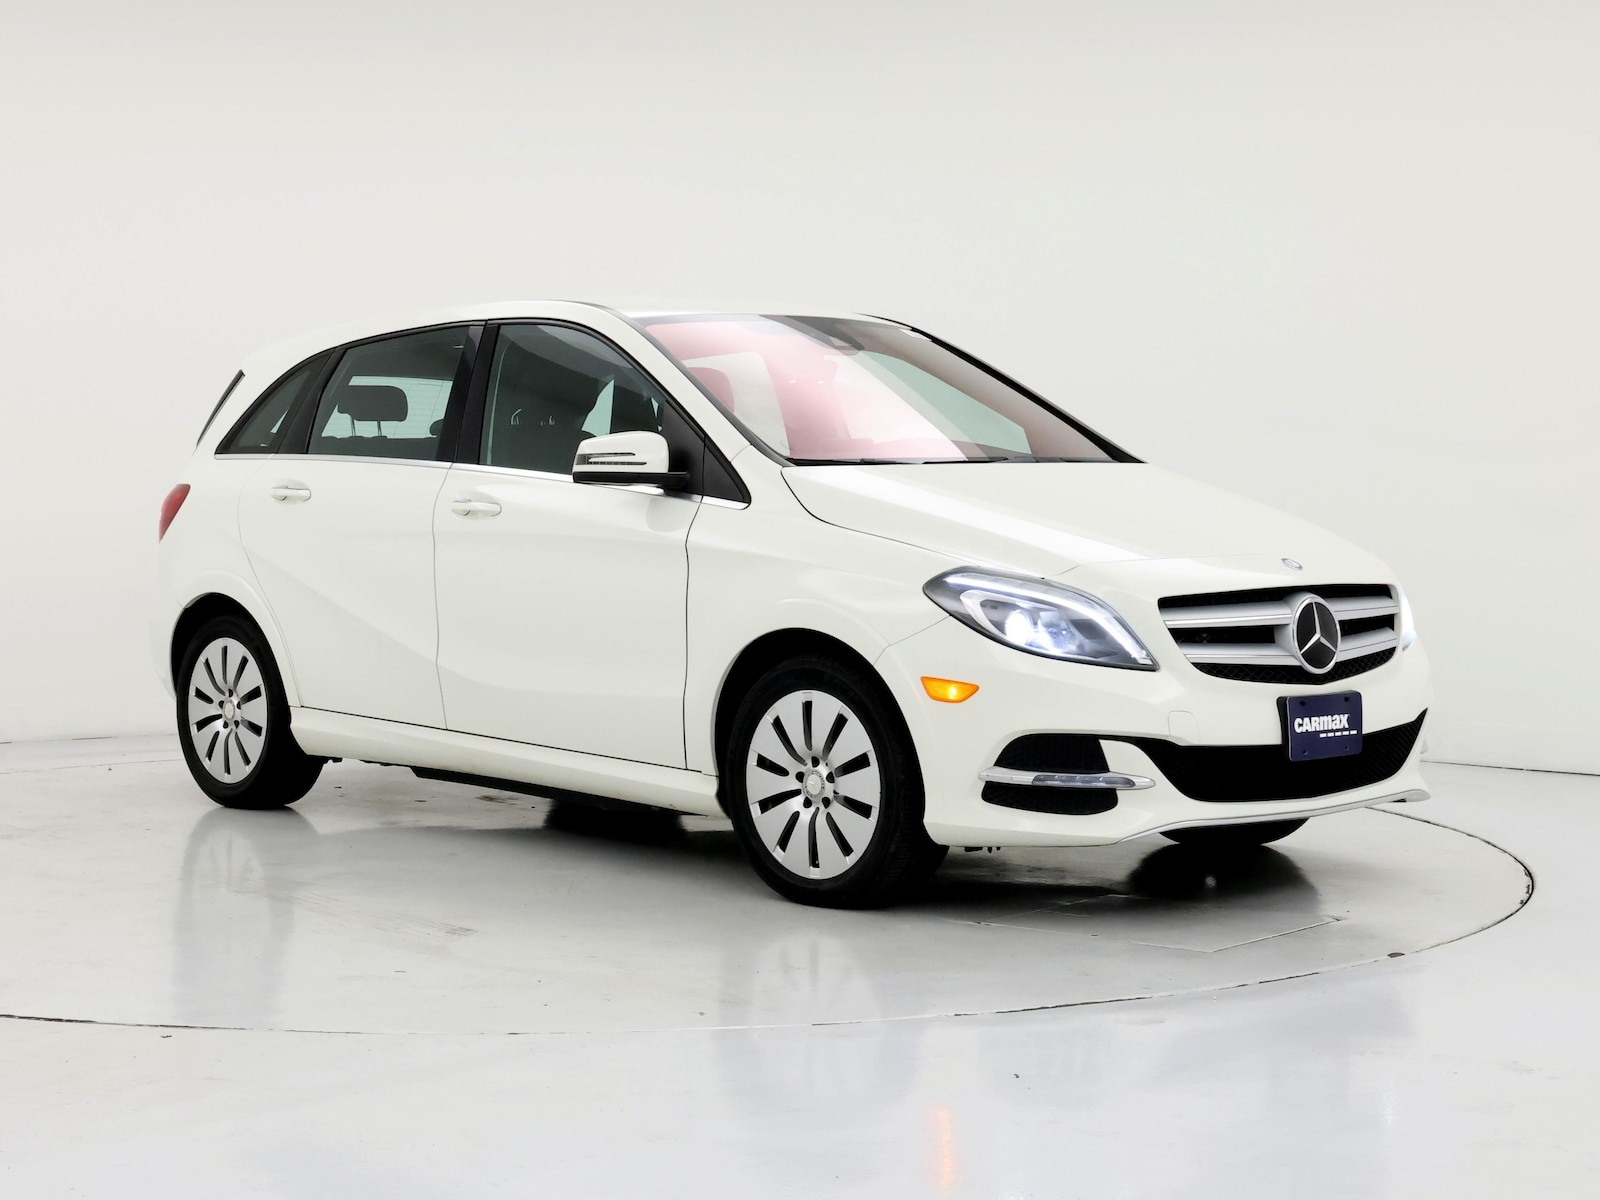 Used 2016 Mercedes-Benz B-Class B250e with VIN WDDVP9AB4GJ011146 for sale in Kenosha, WI